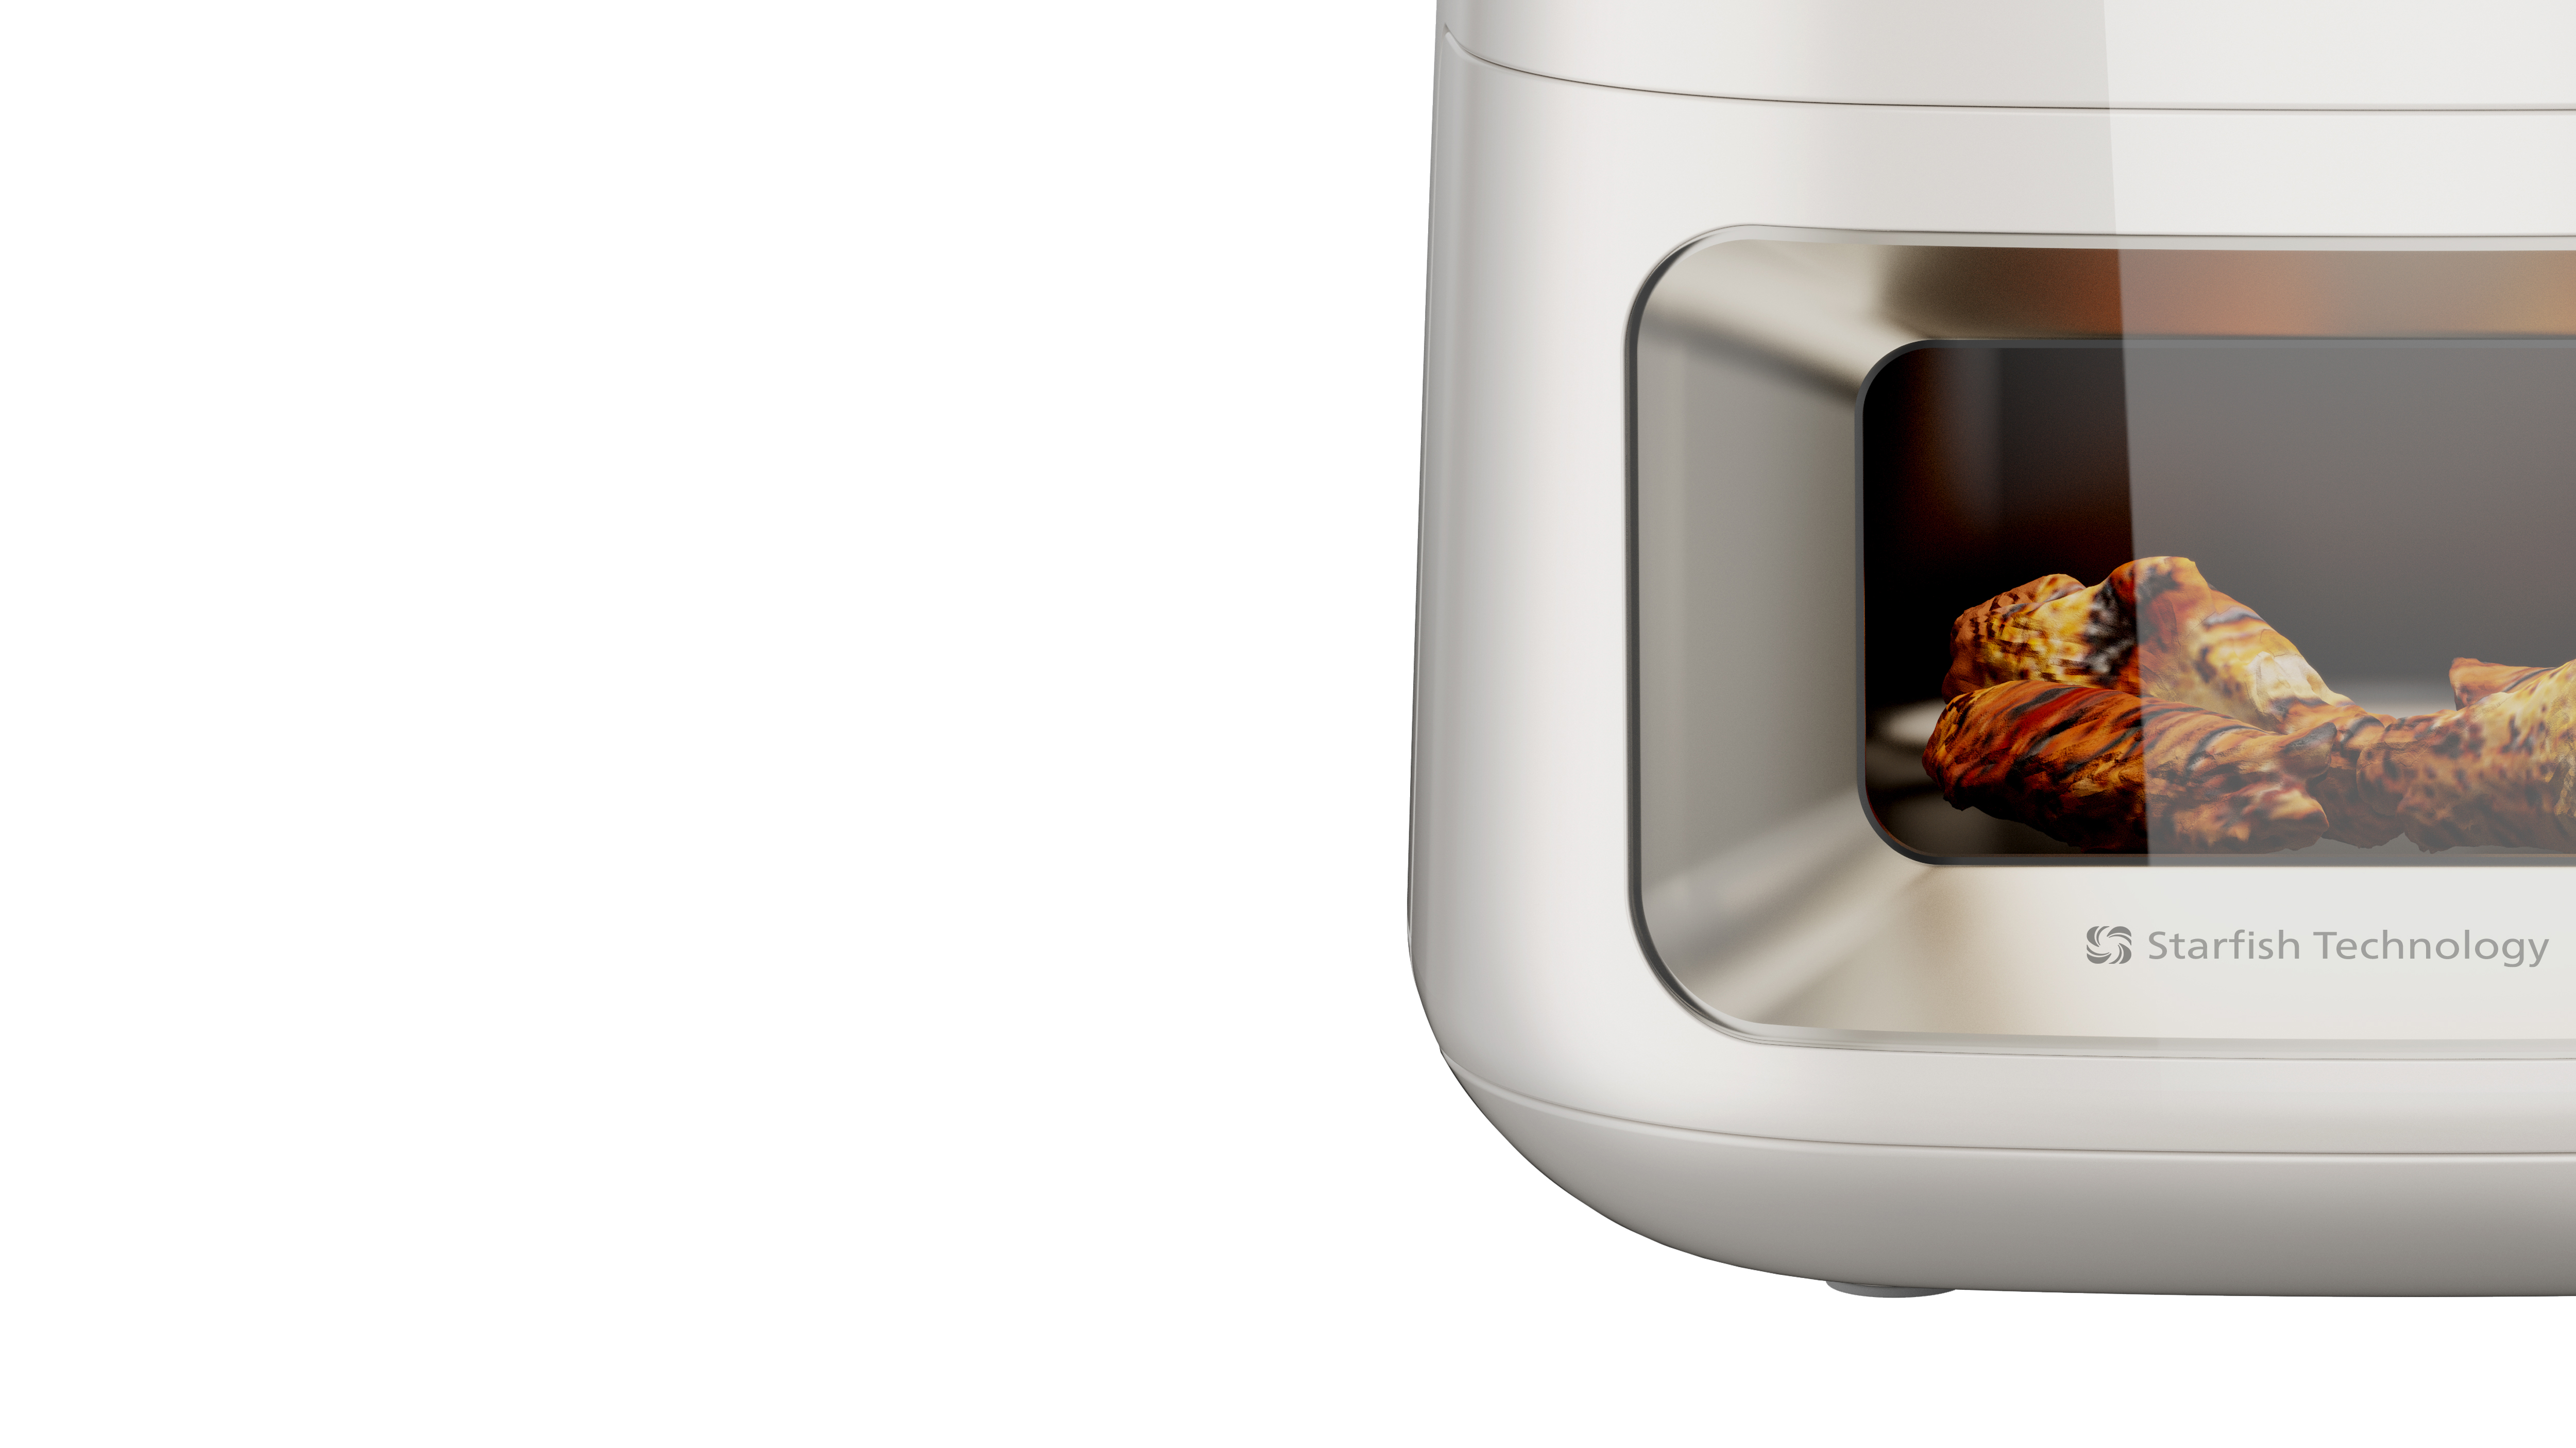 Trinity Visible Air Fryer